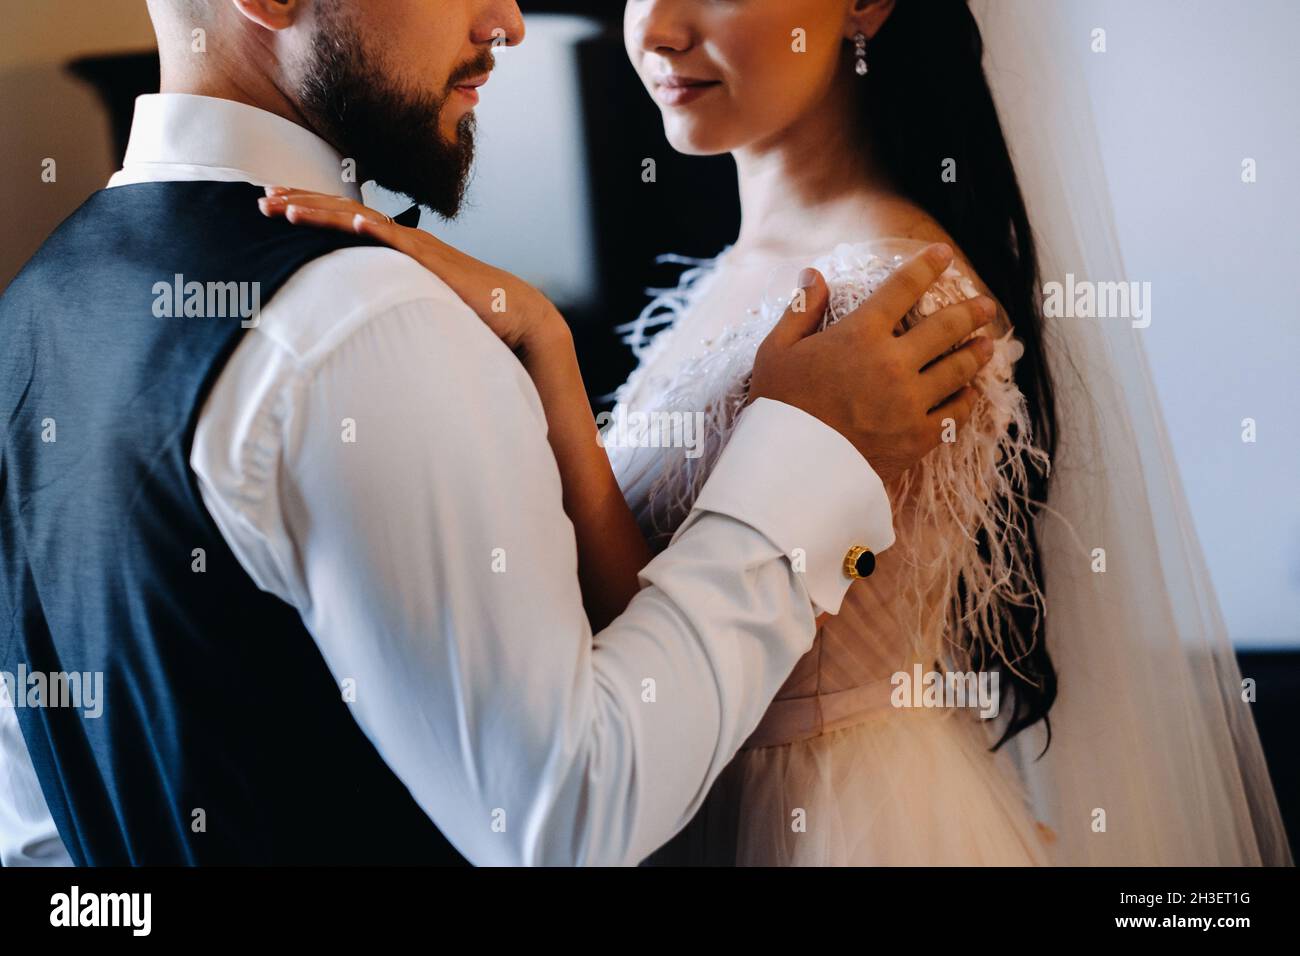 Morning of the bride. The groom stands with the bride near the mirror. Stock Photo